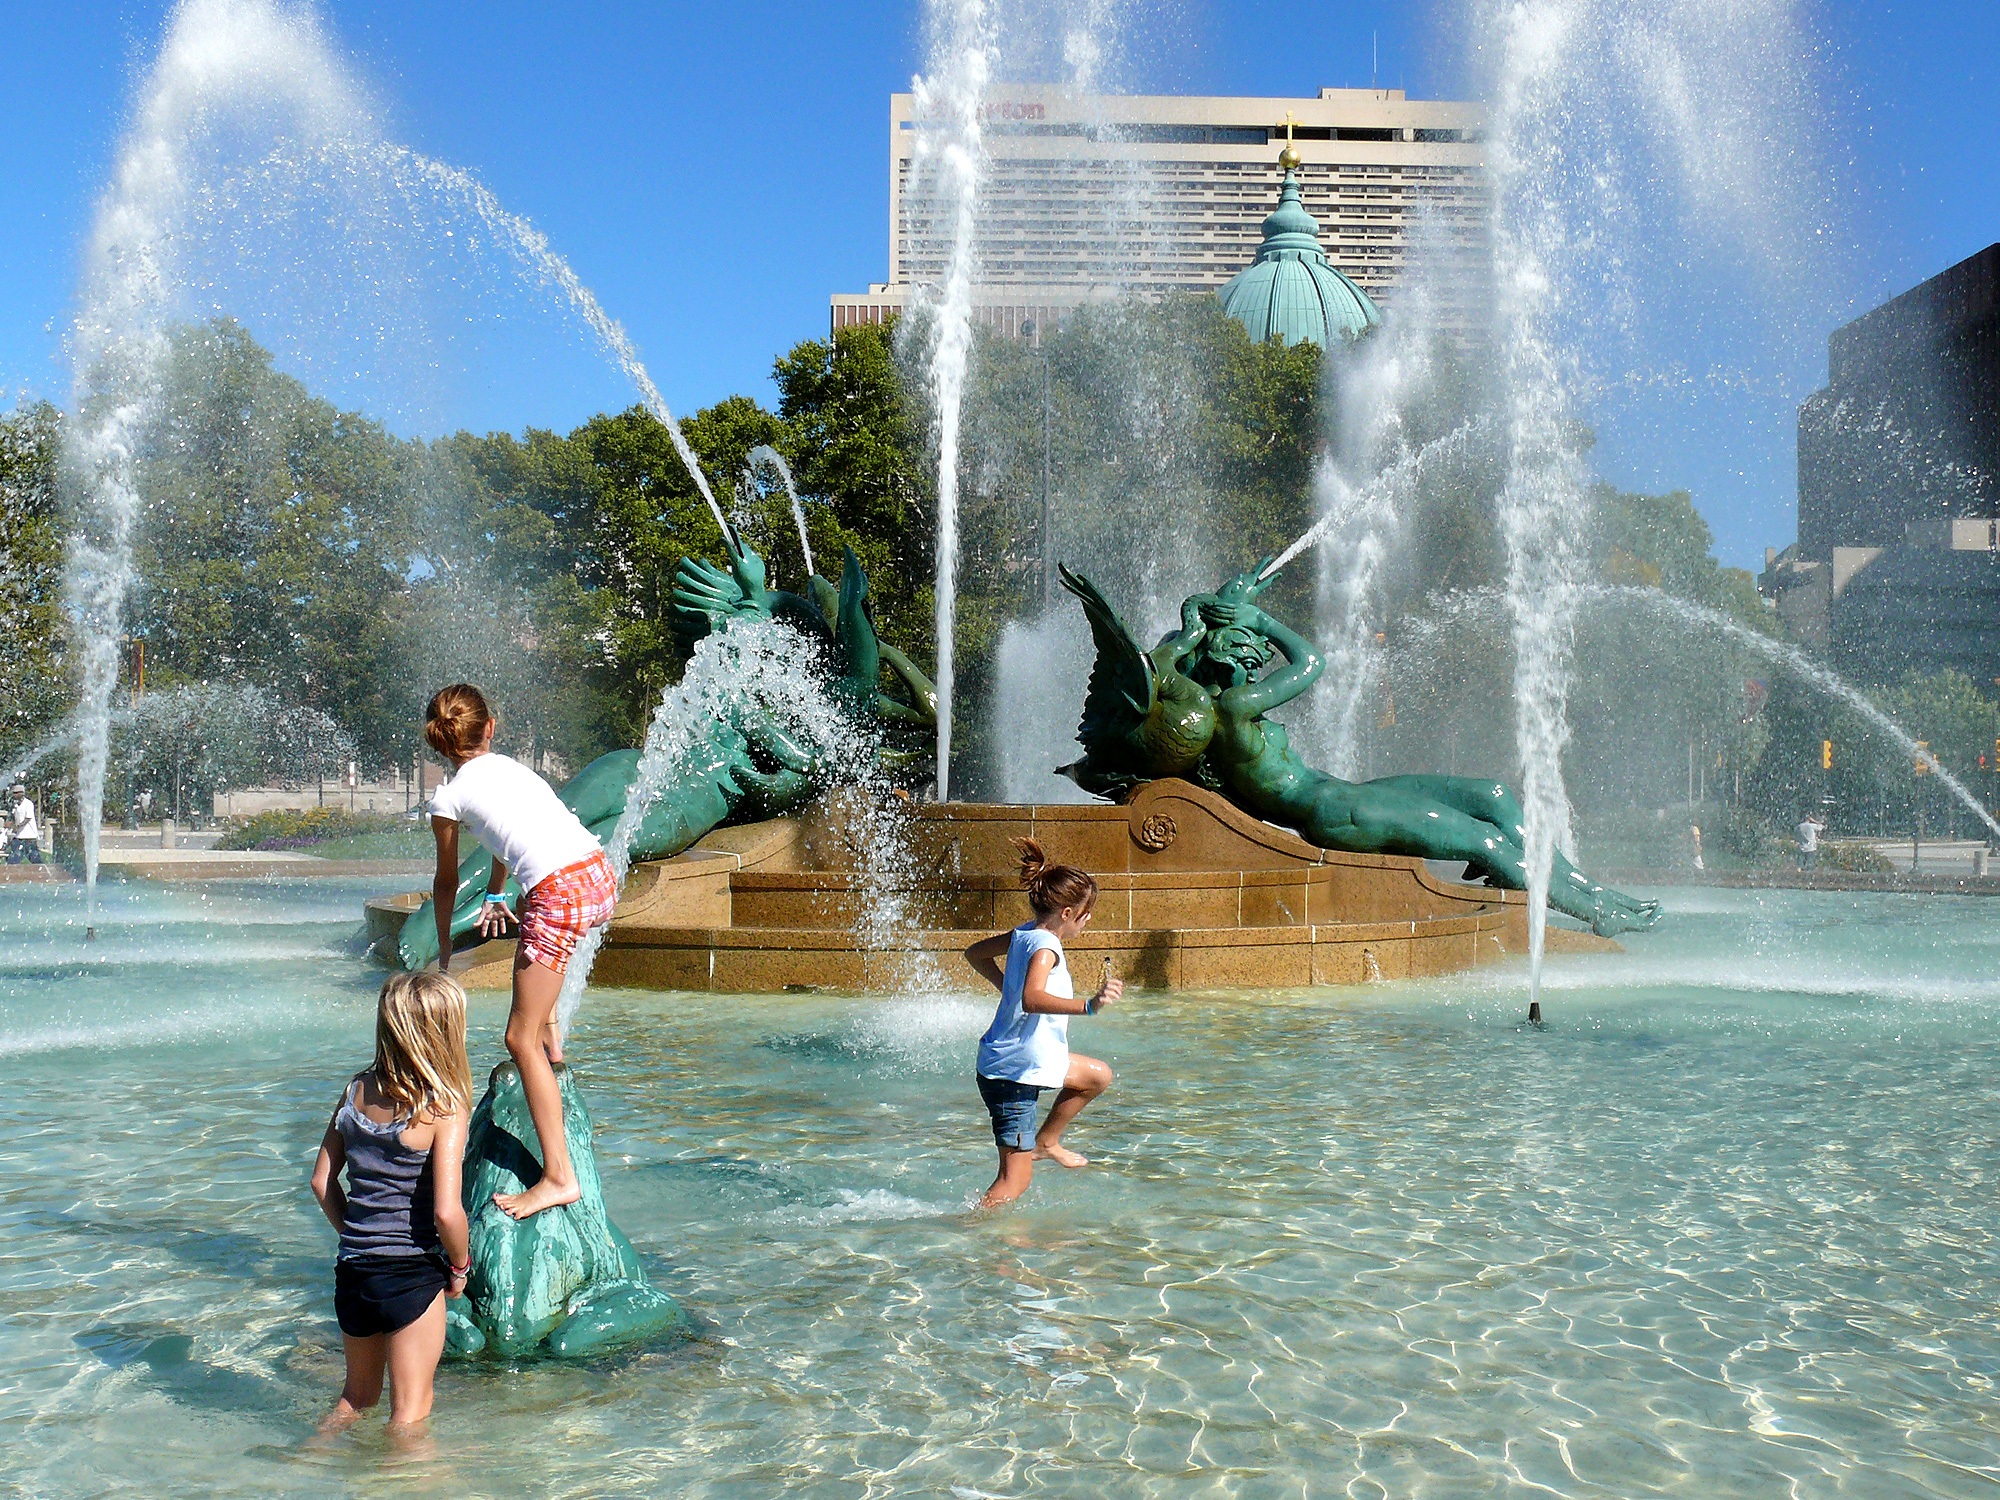 Children playing in the fountain photo